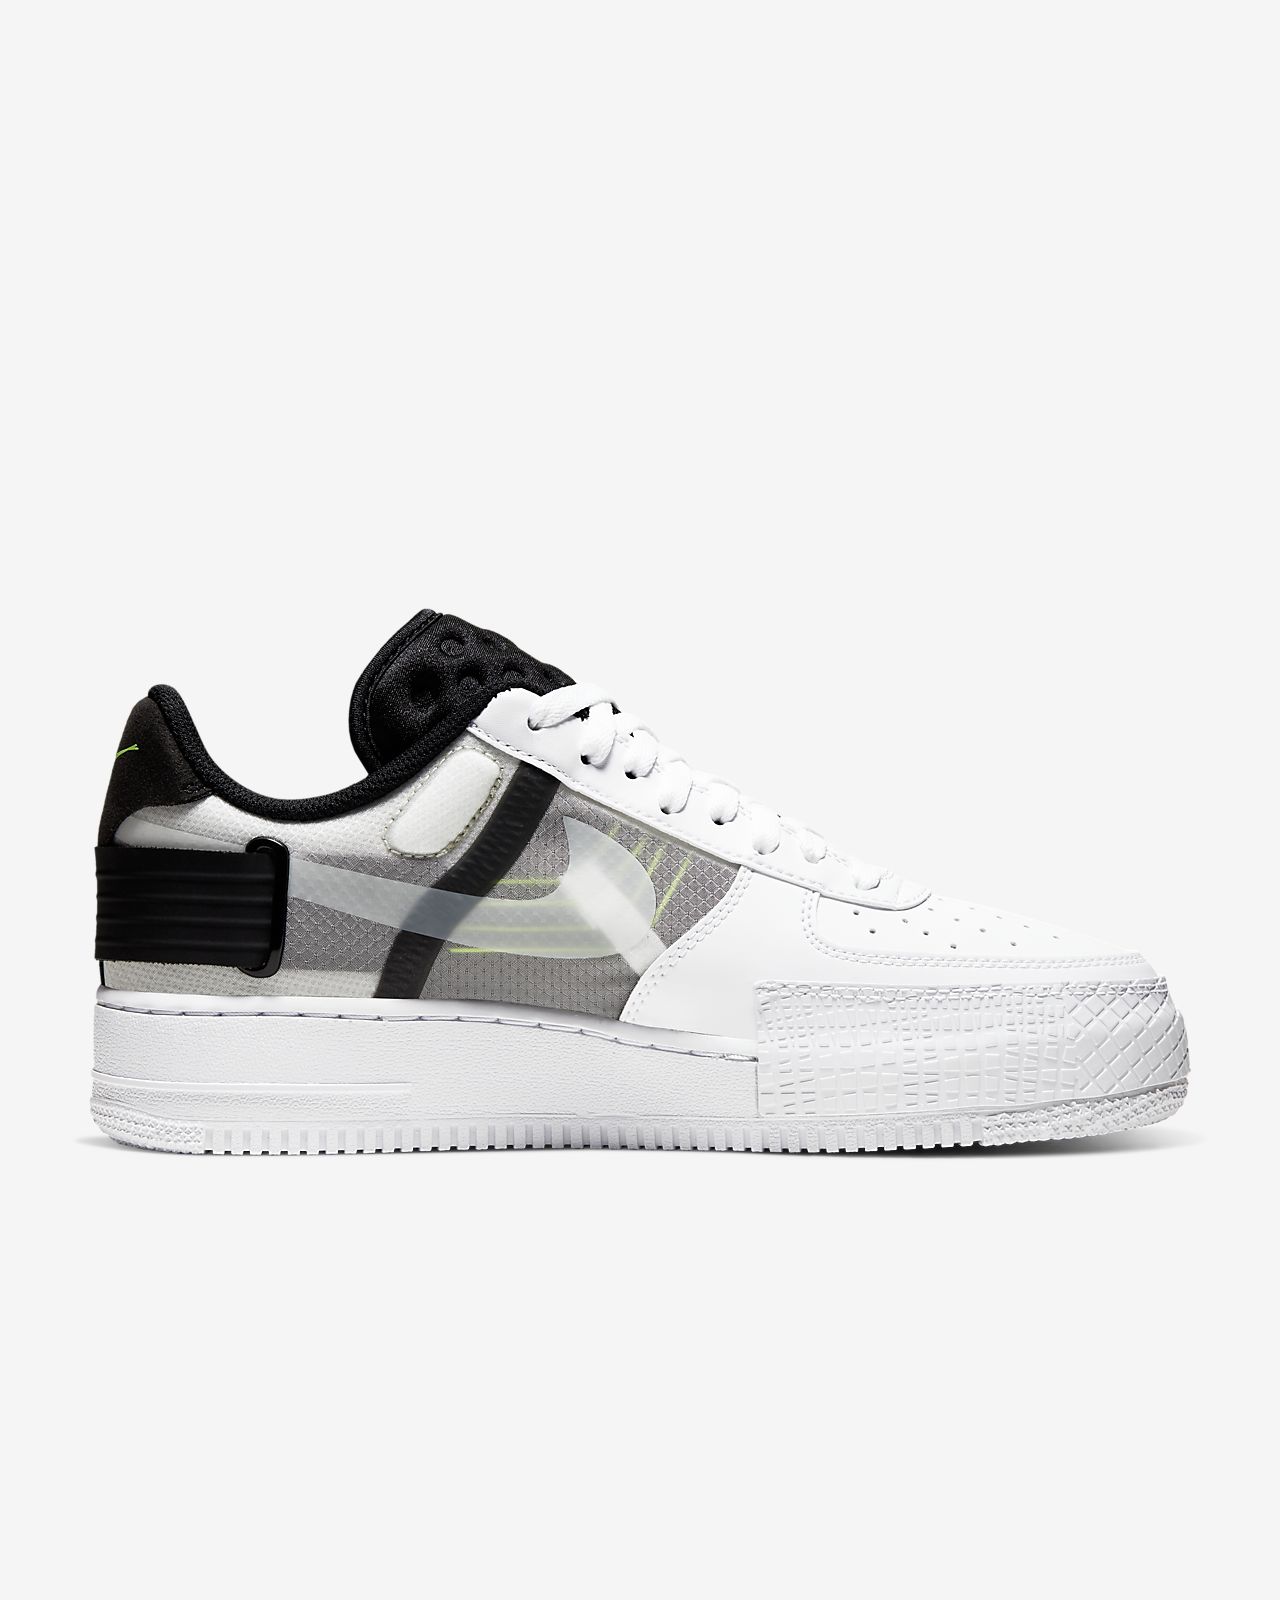 air force one type white black